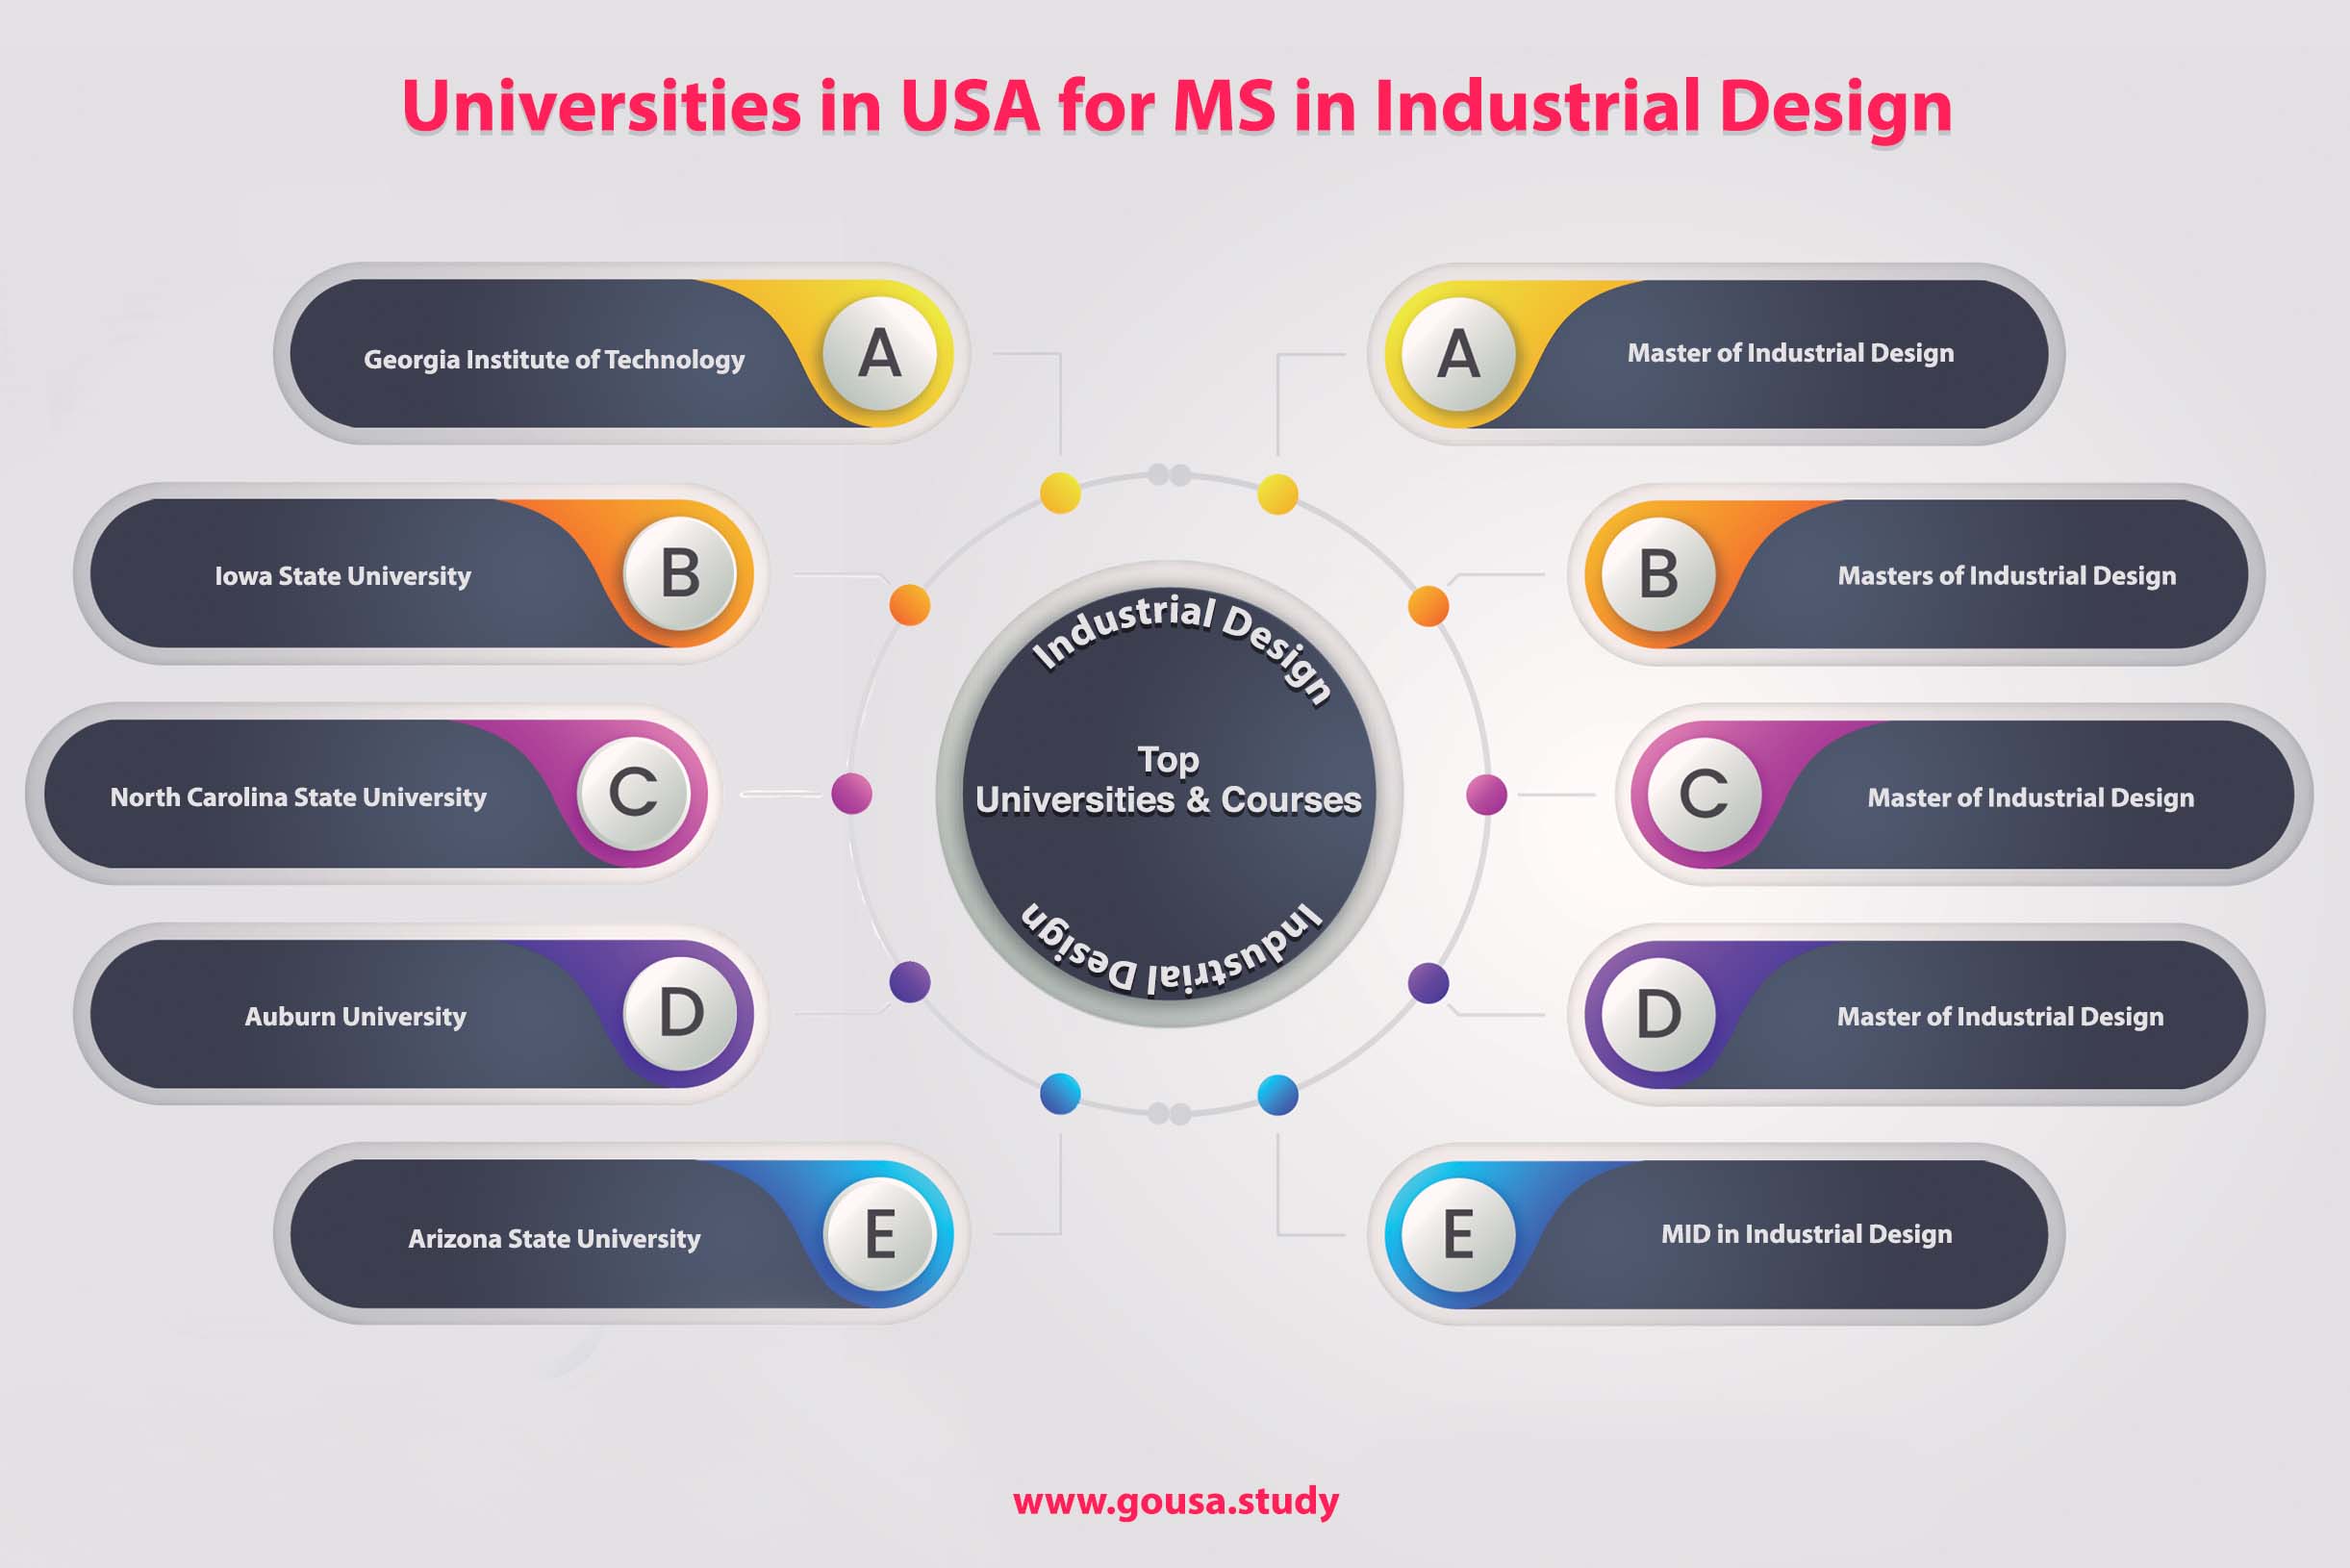 Universities in USA for MS in Industrial Design